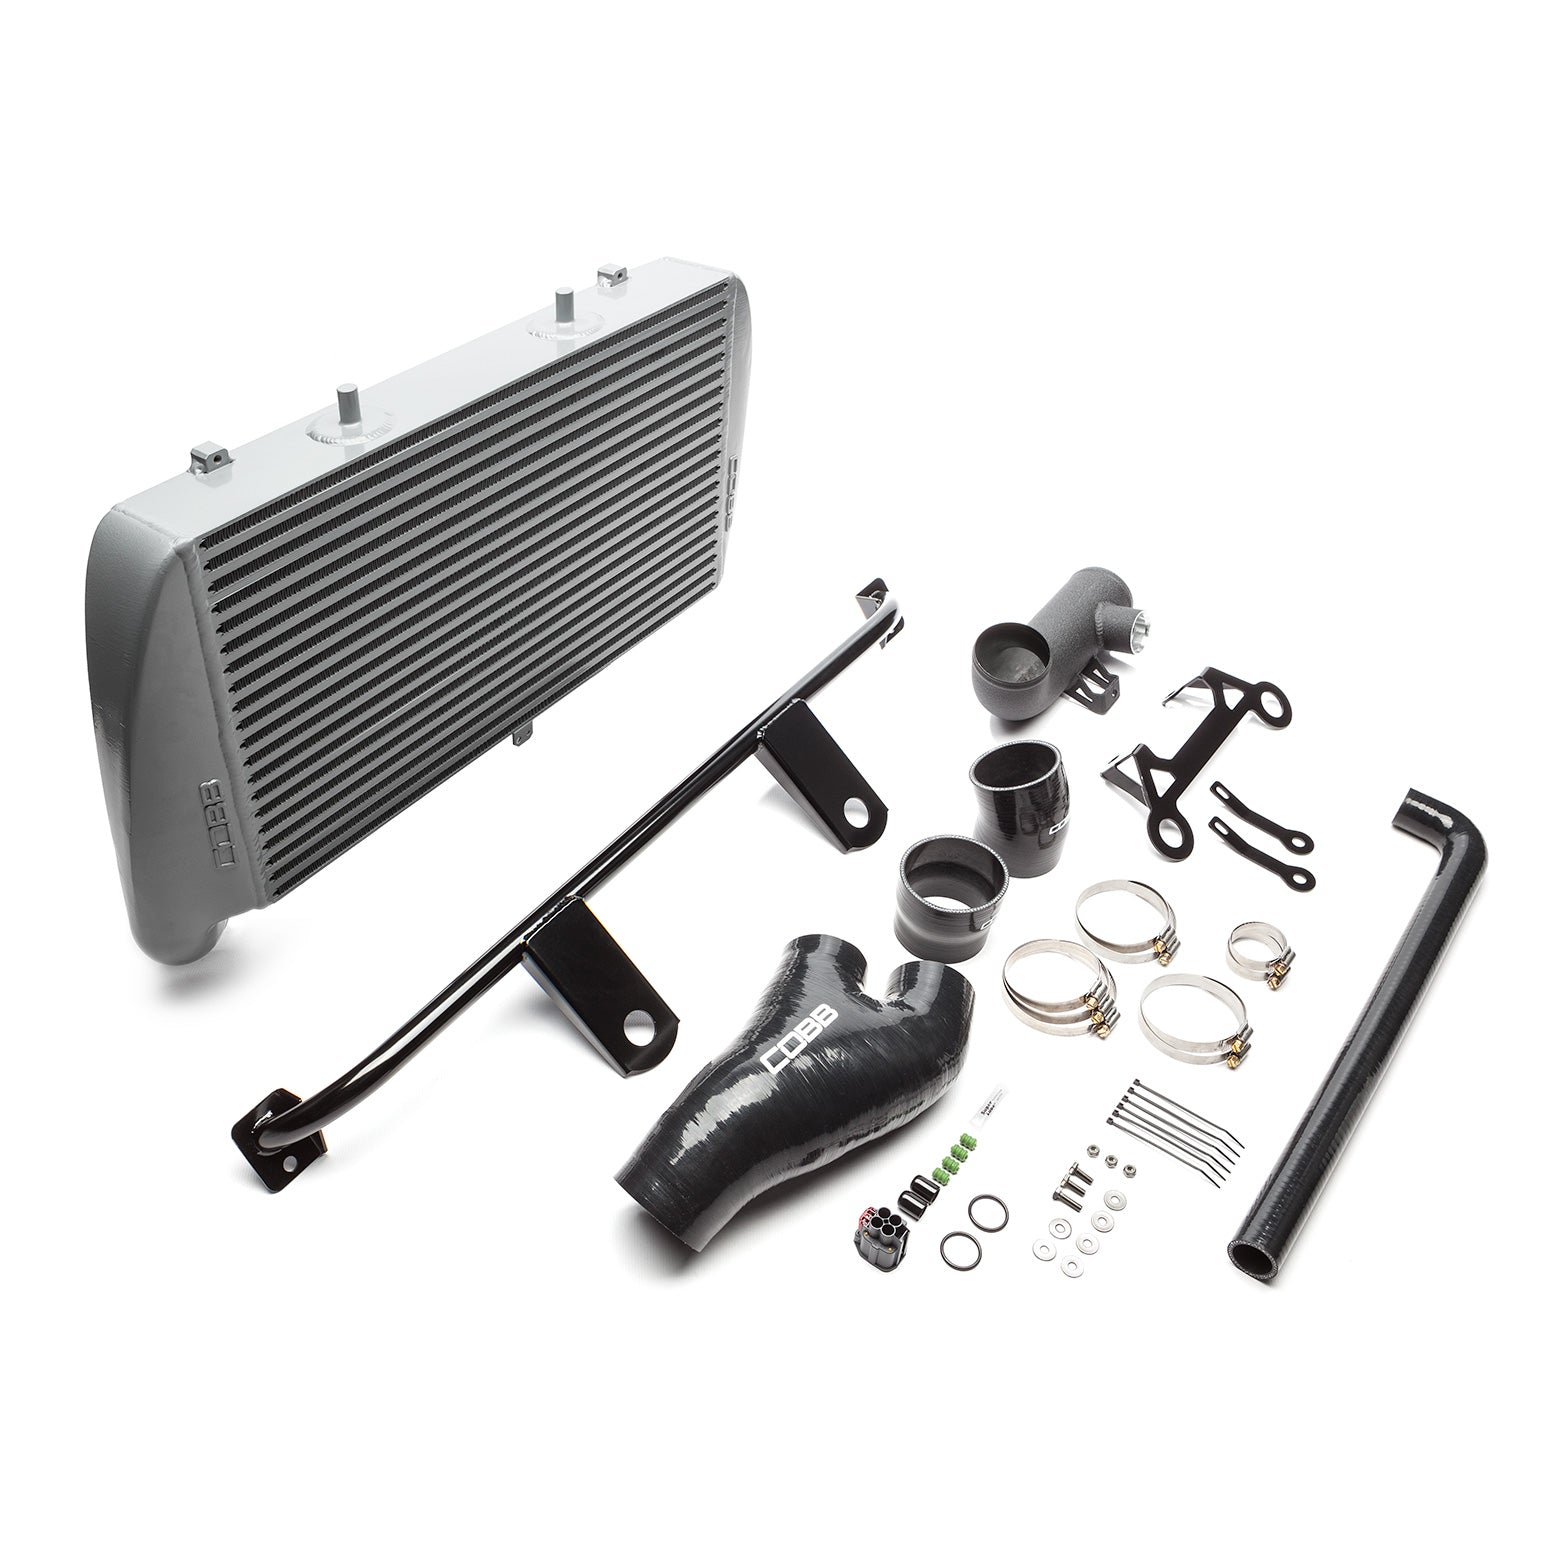 COBB FOR0060020SL-NI FORD Stage 2 Power Package Silver F-150 Ecoboost 3.5L 2017-2019 Photo-1 